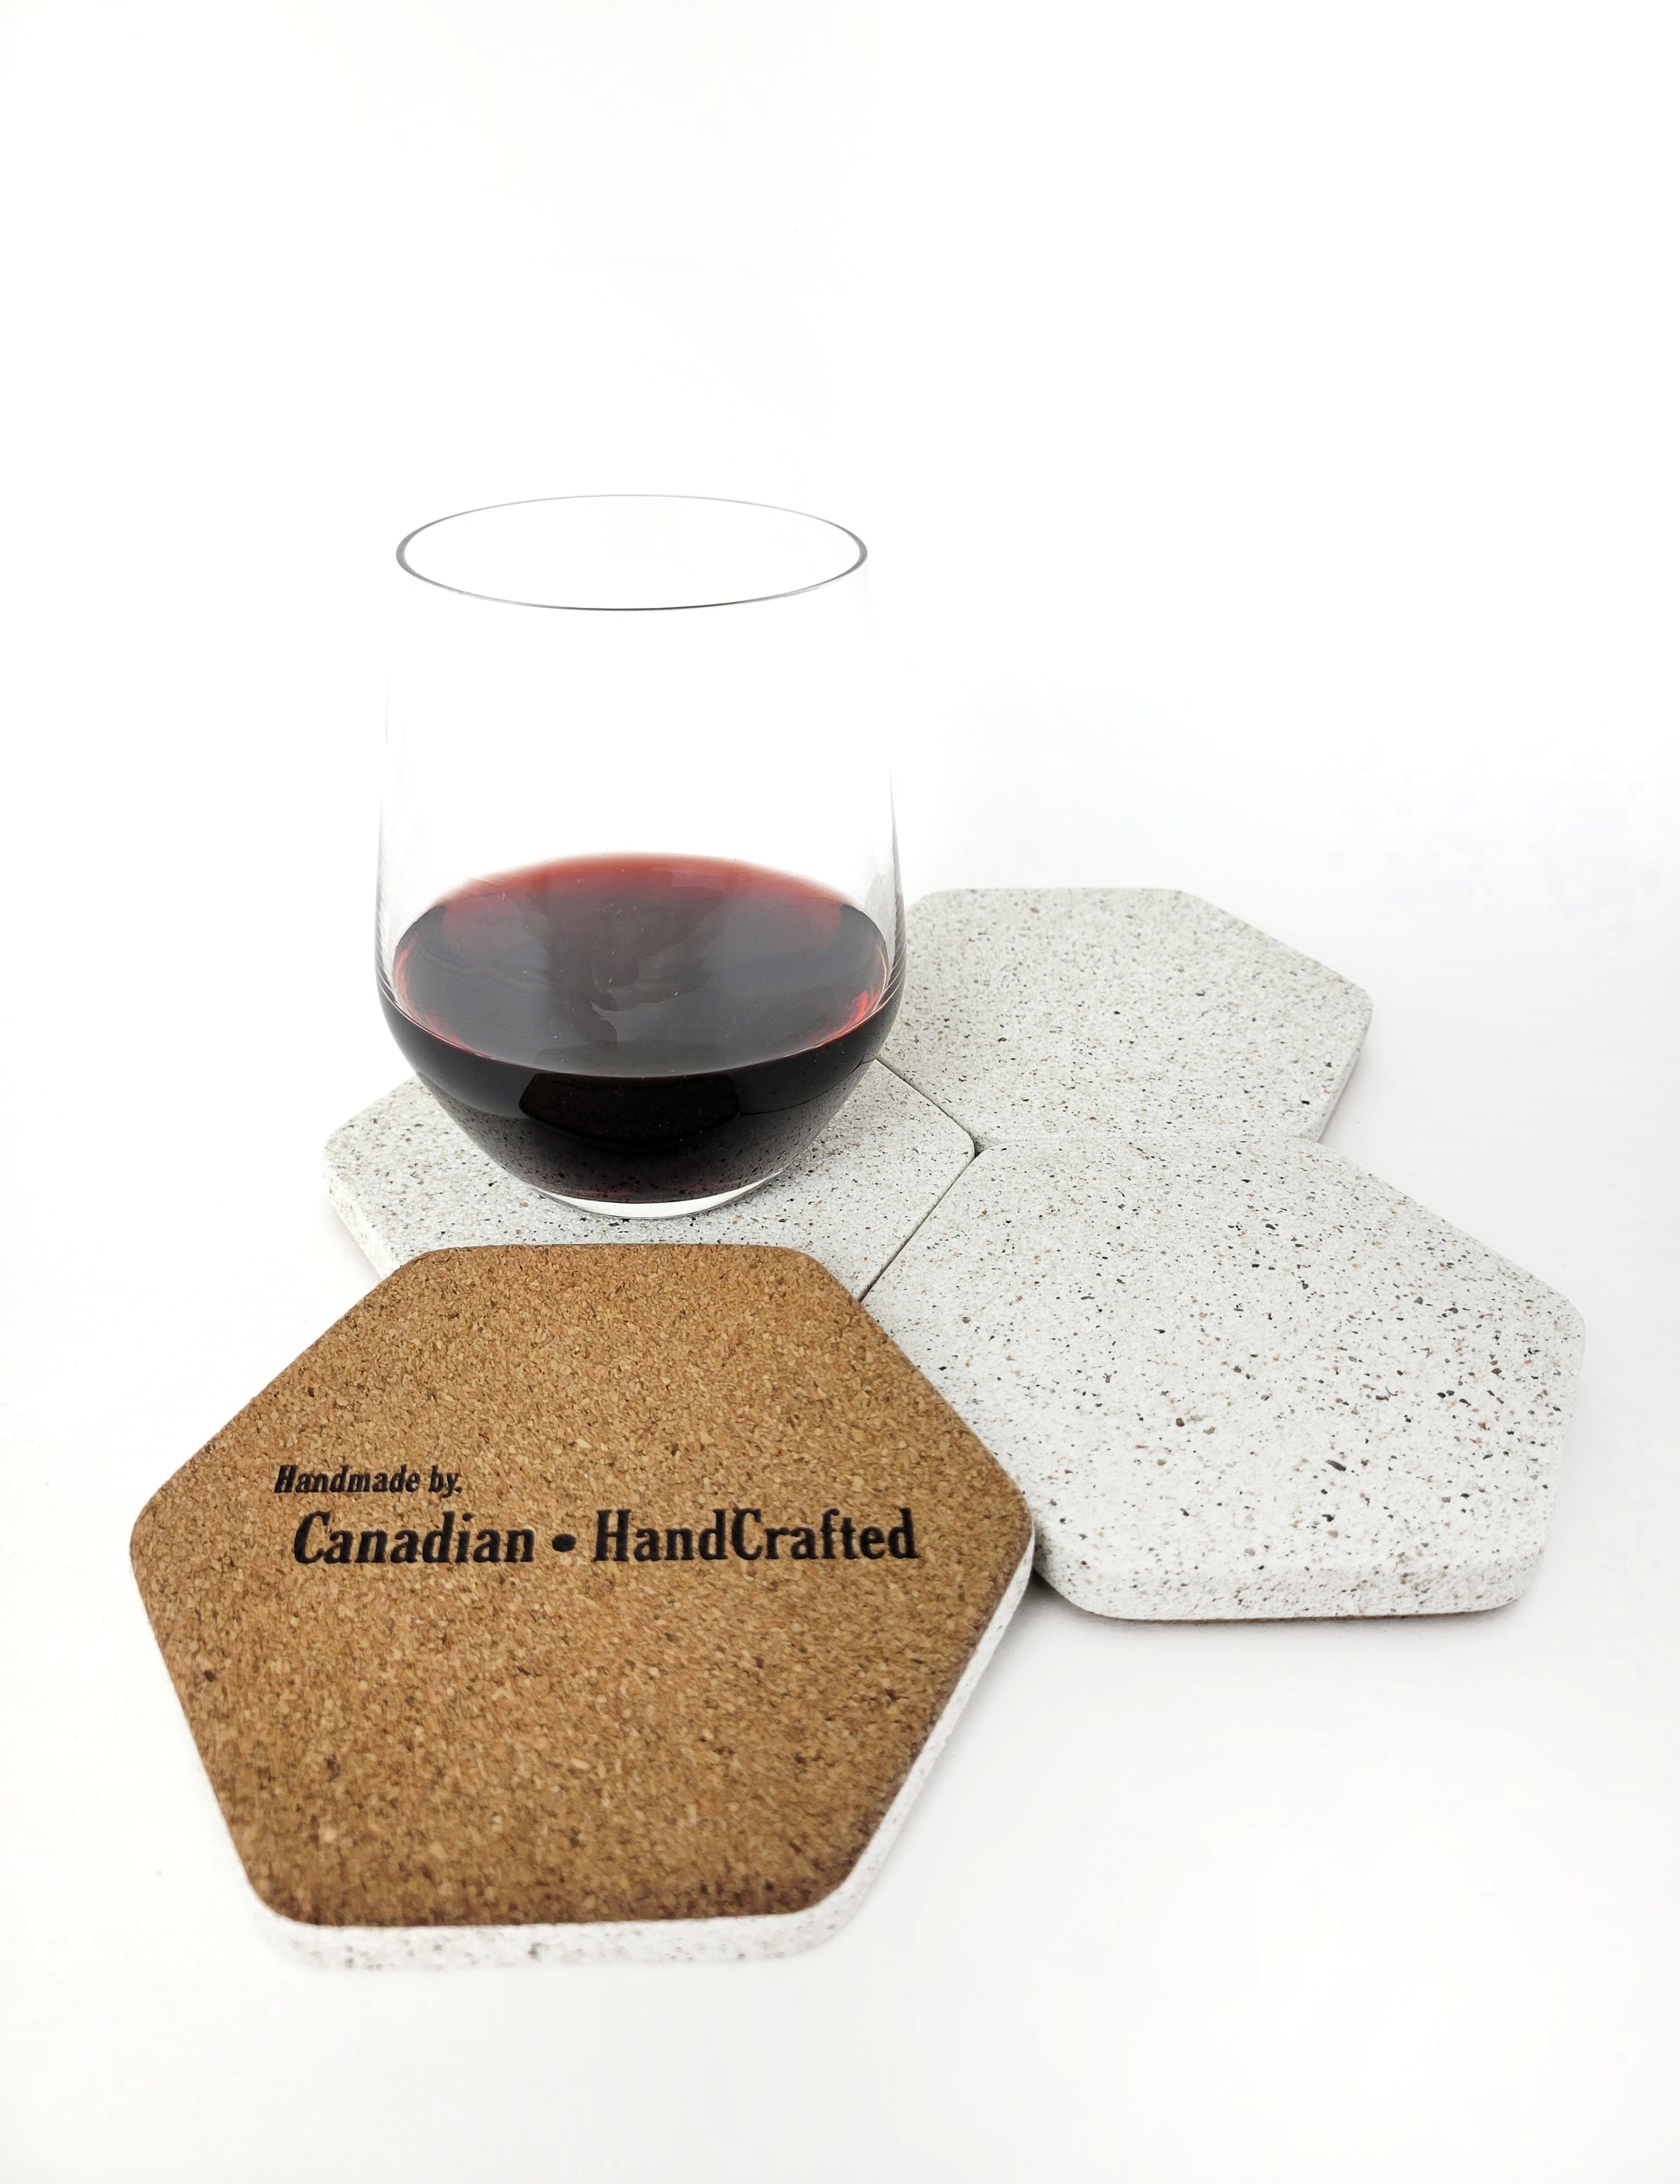 Four white sandstone concrete hexagon coasters displayed with a glass of red wine, one of the coasters is flipped upside-down displaying a soft cork bottom.